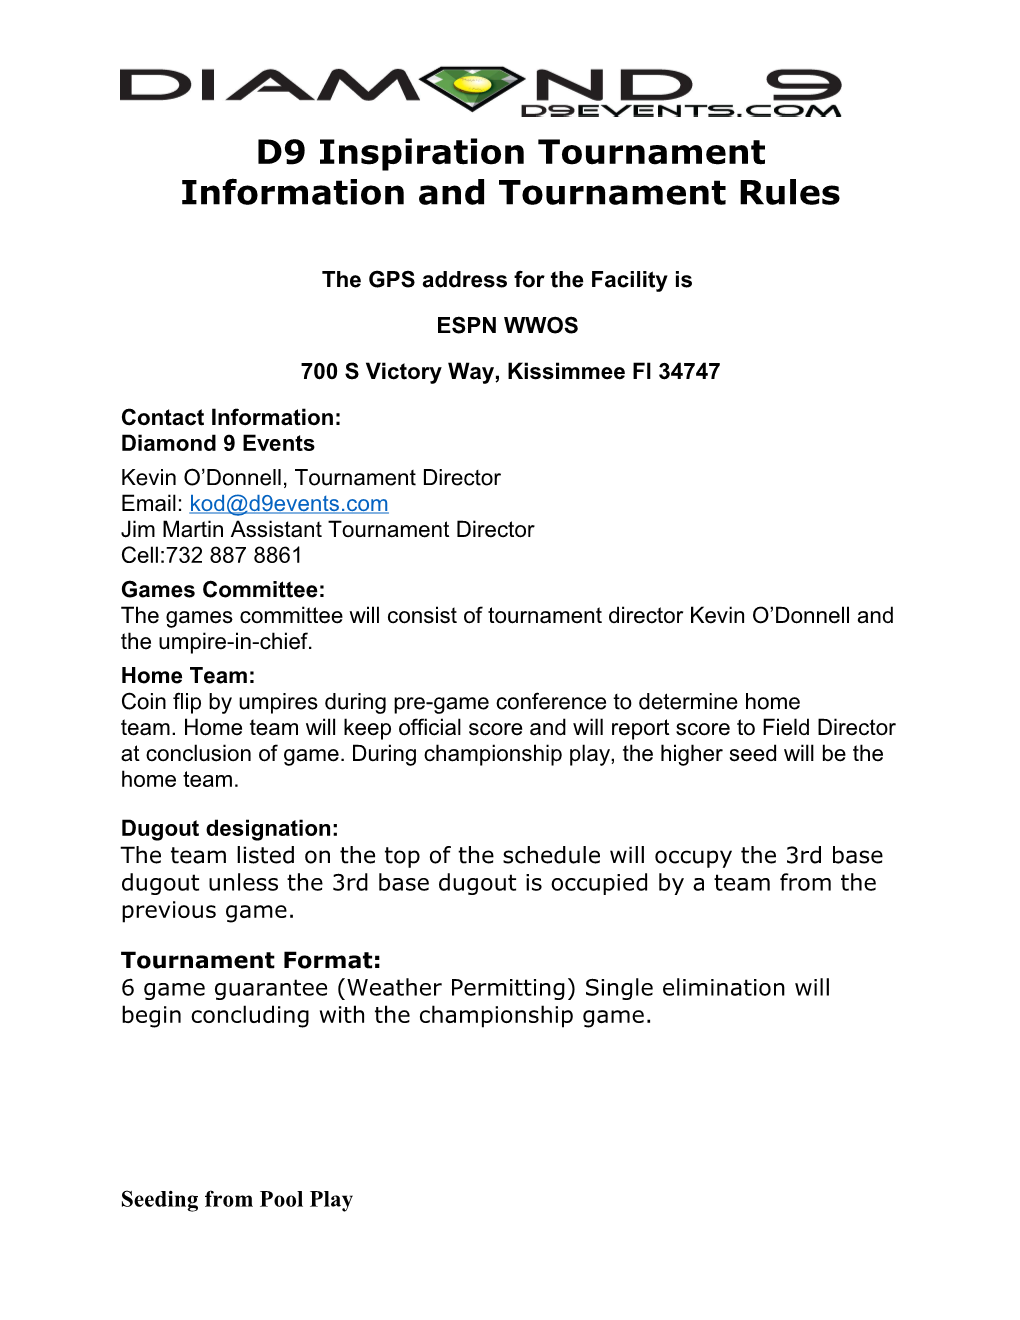 Information and Tournament Rules